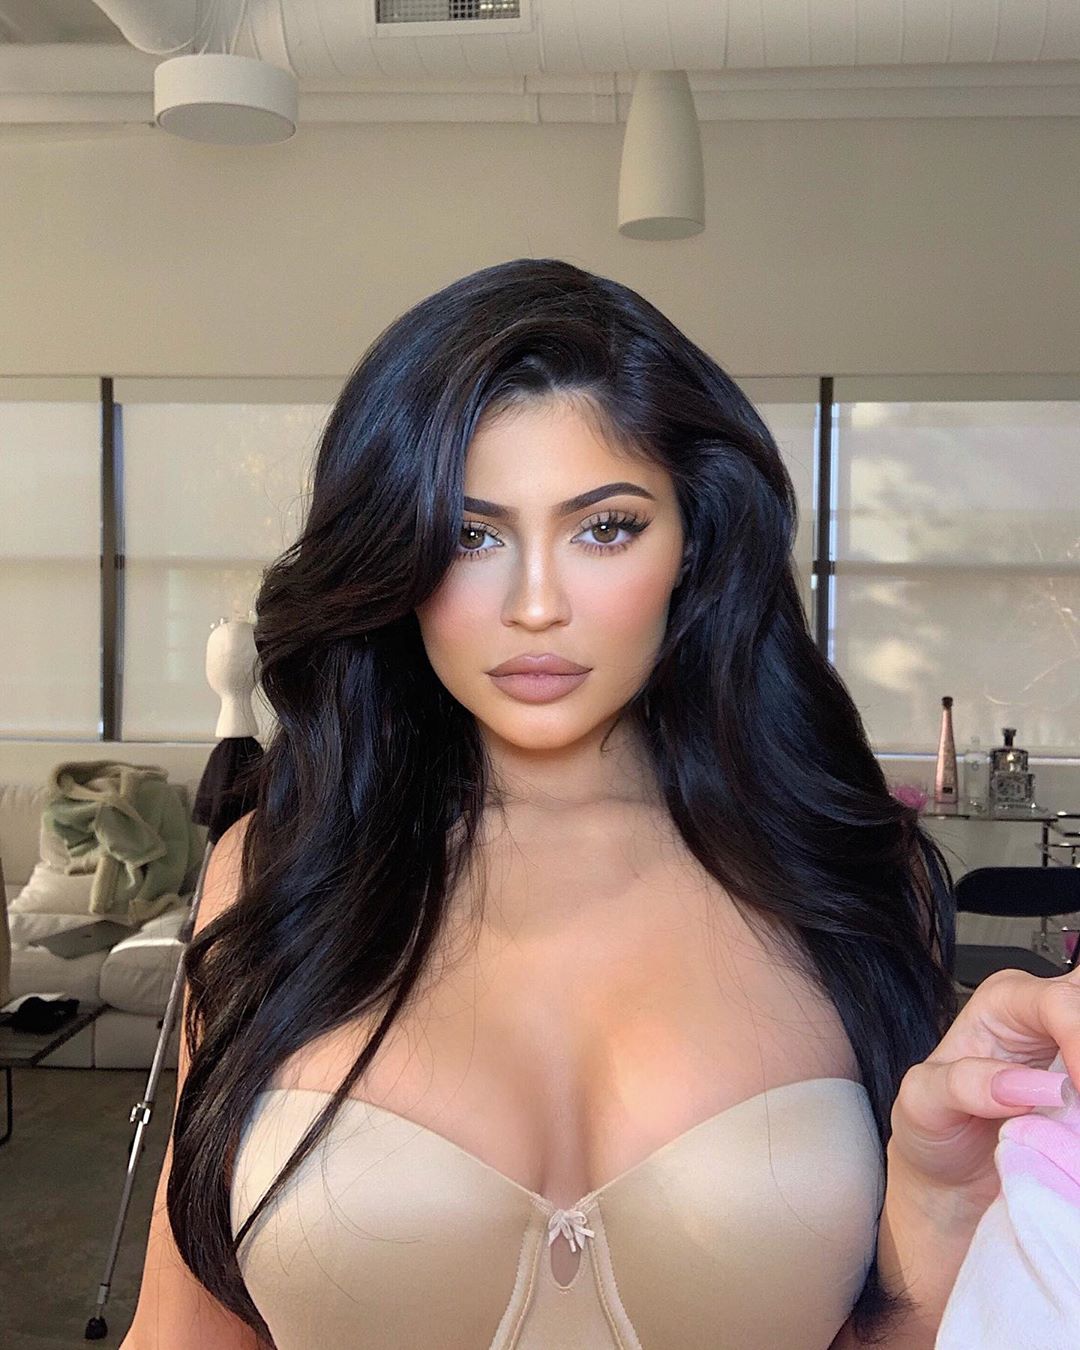 Kylie Jenner Porn Videos - Kylie Jenner Nude Photos | #TheFappening